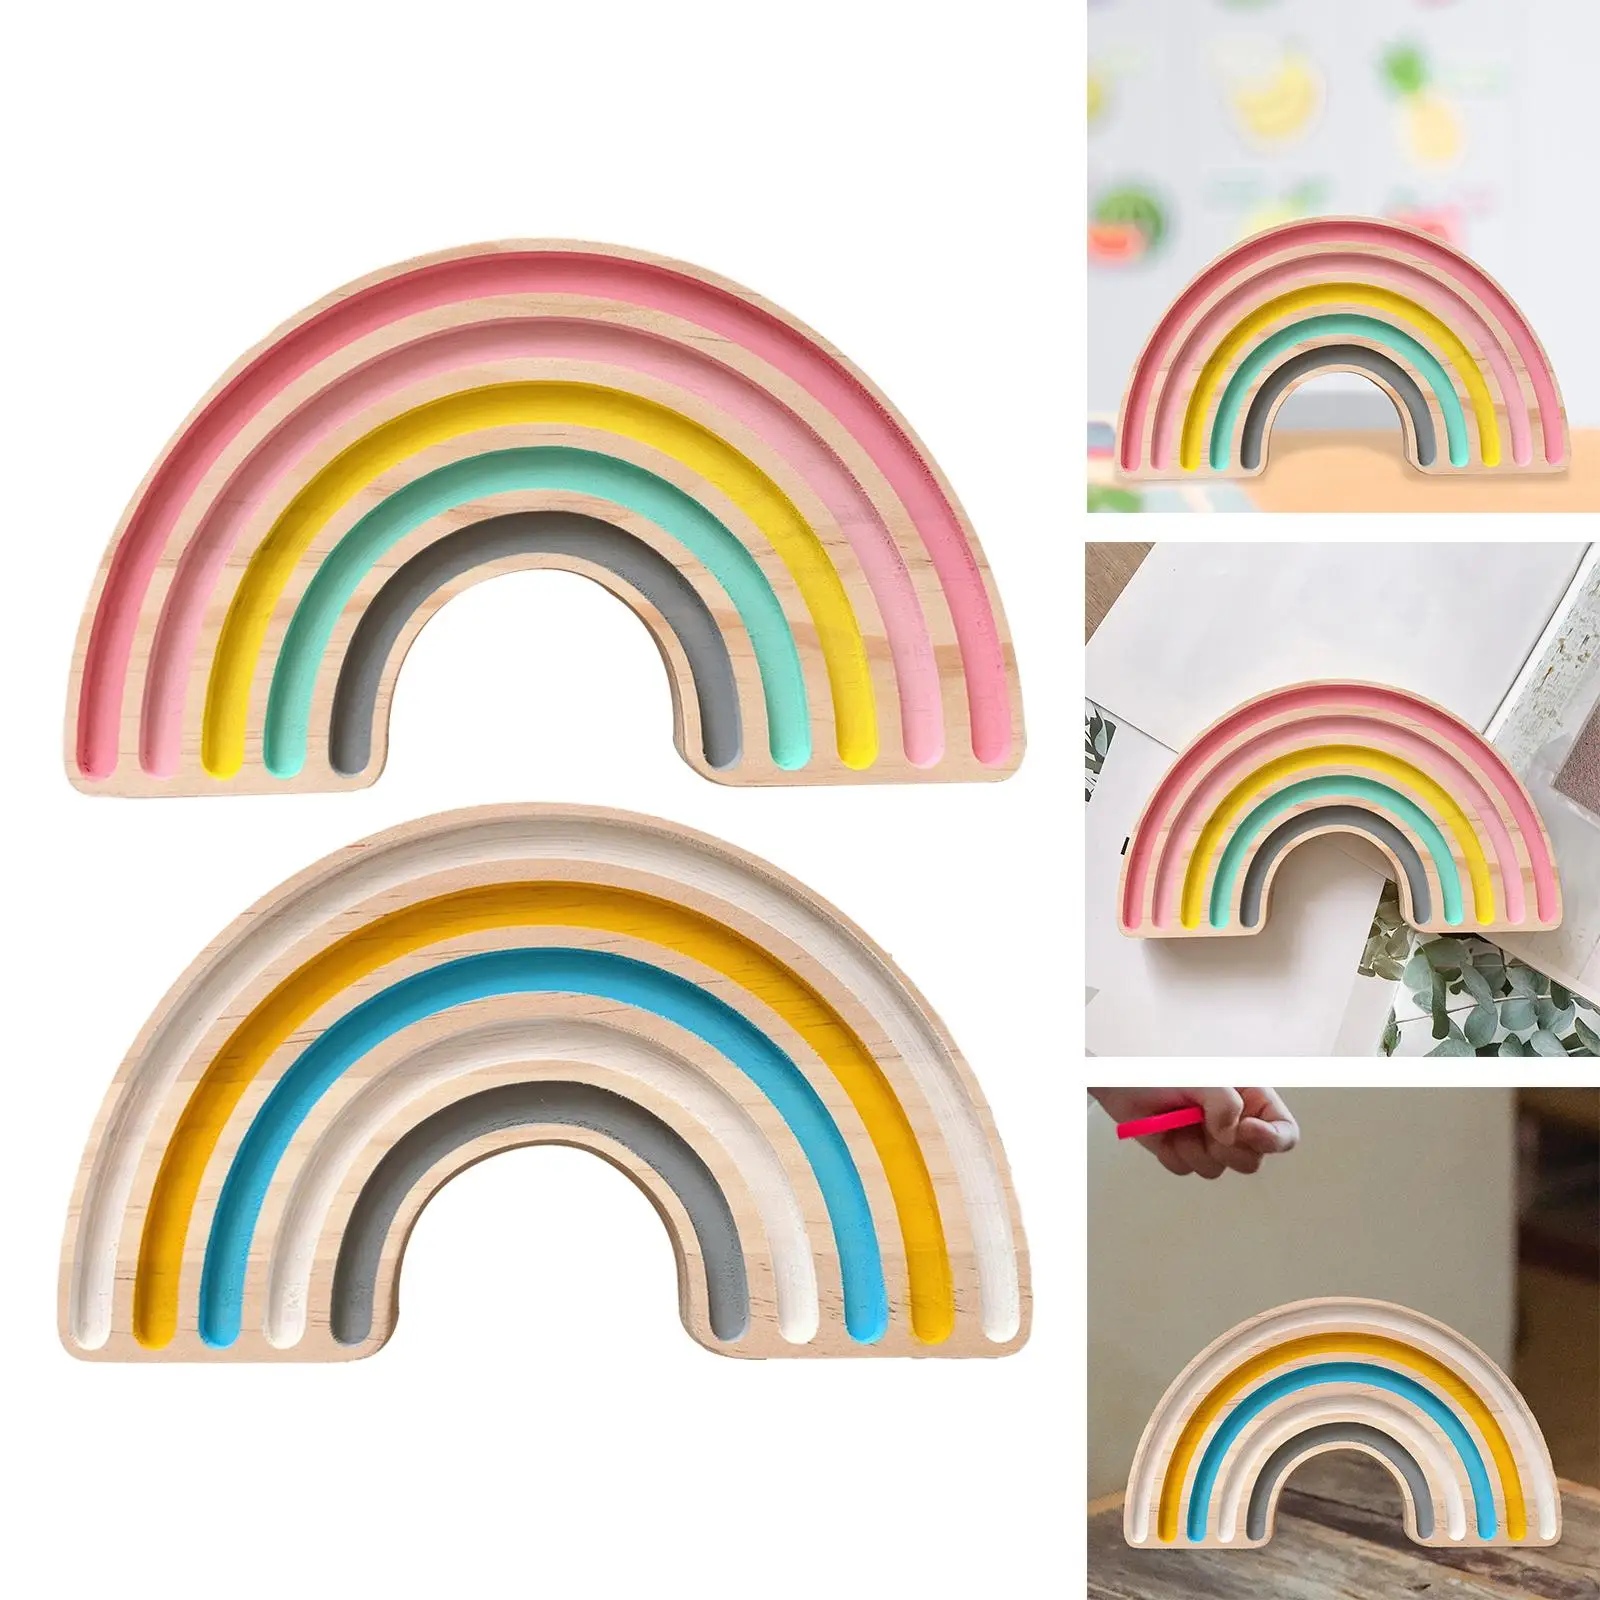 Wooden Rainbow Craft Board Ornament for Table Bookshelves Photographic Props